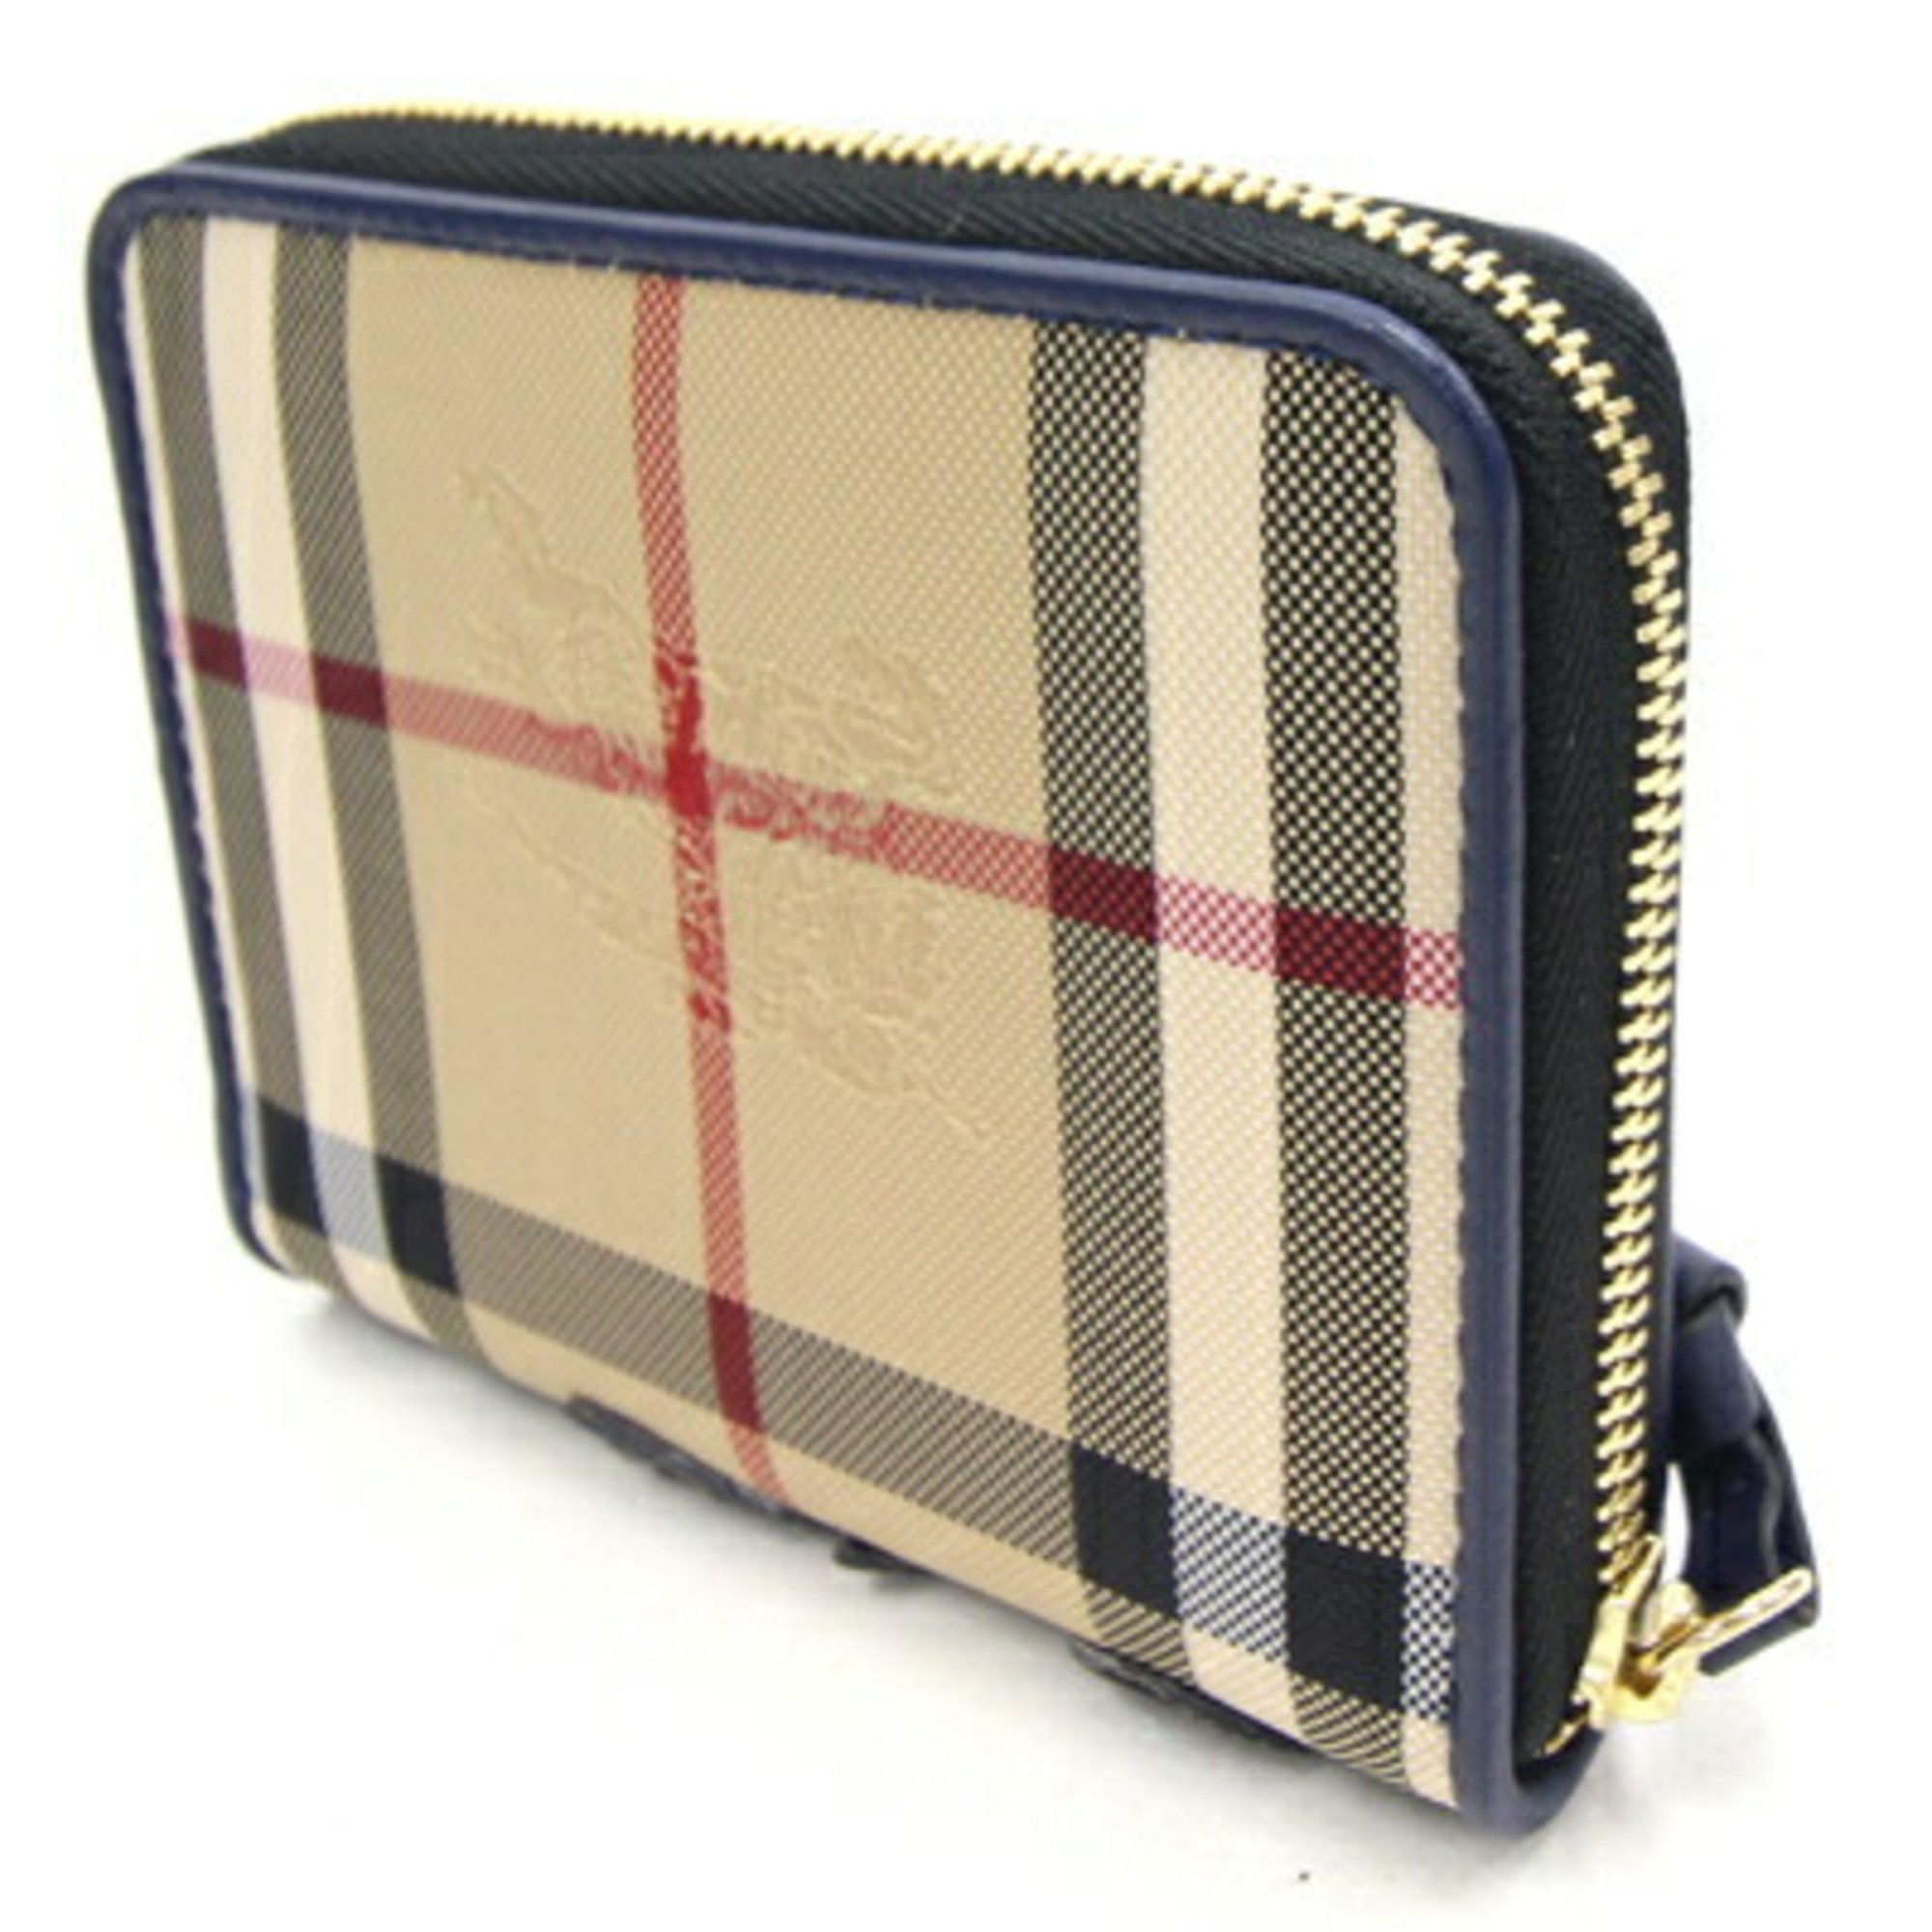 Burberry Coin Case Beige Navy PVC Leather Purse Card Wallet Compact Check Women's BURBERRY